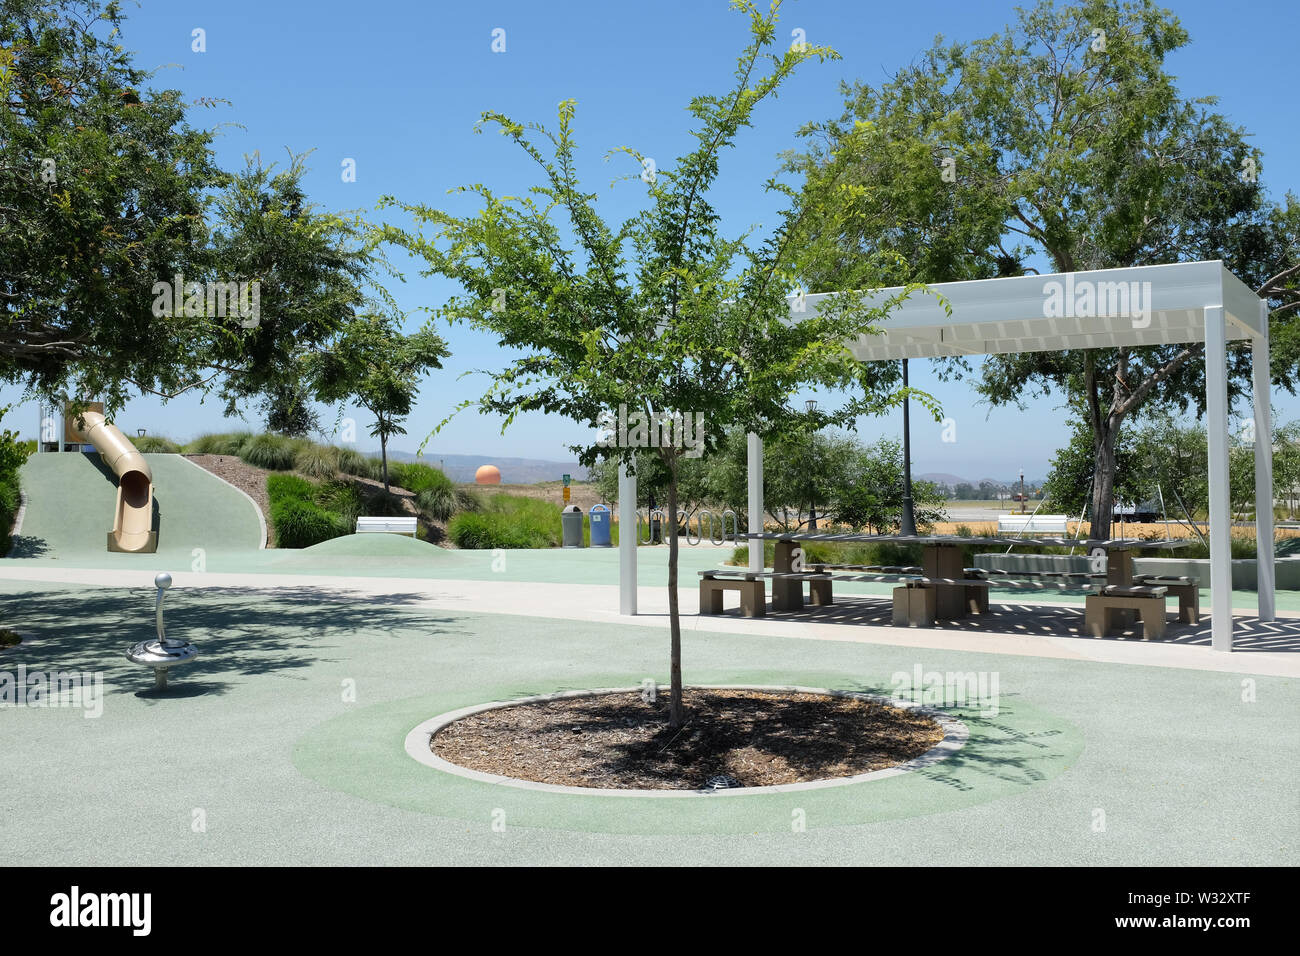 IRIVNE, CALIFORNIA - JULY 11, 2019: Childrens Play area in the Bosque Area of the Orange County Great Park, with Slide and Balloon Ride in Background Stock Photo